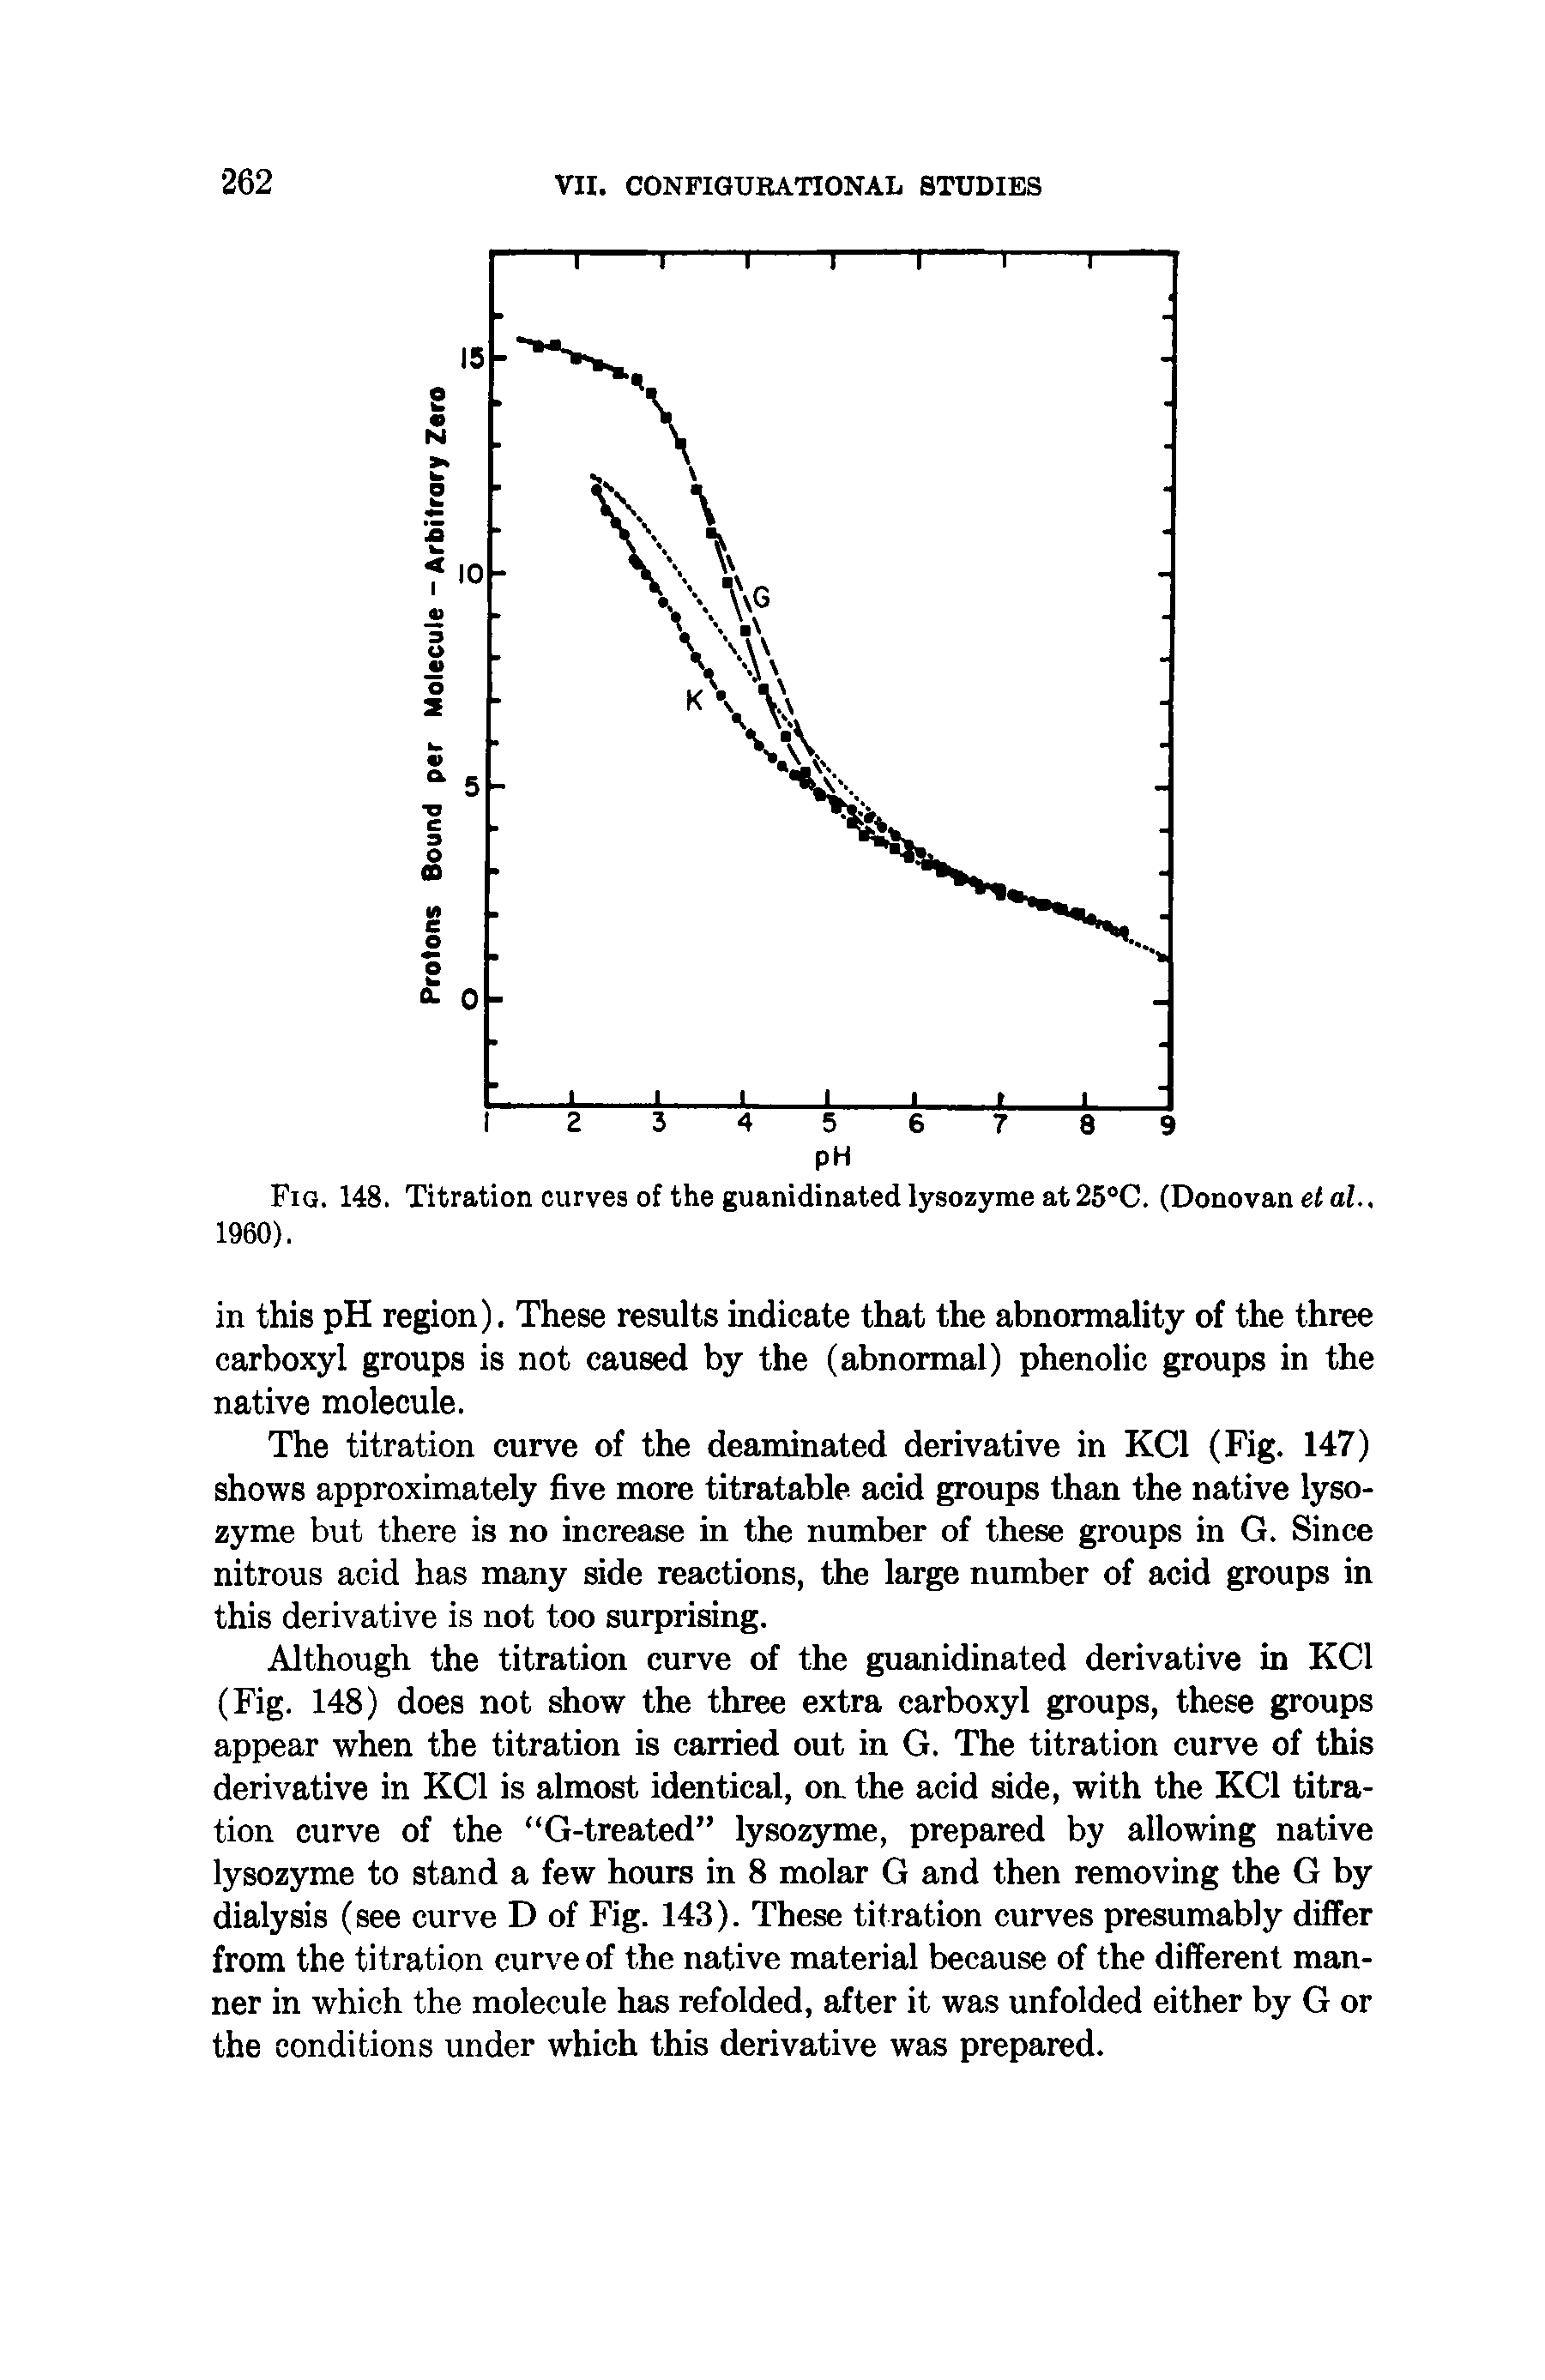 Fig. 148. Titration curves of the guanidinated lysozyme at 25 C. (Donovan efaf.. 1960).